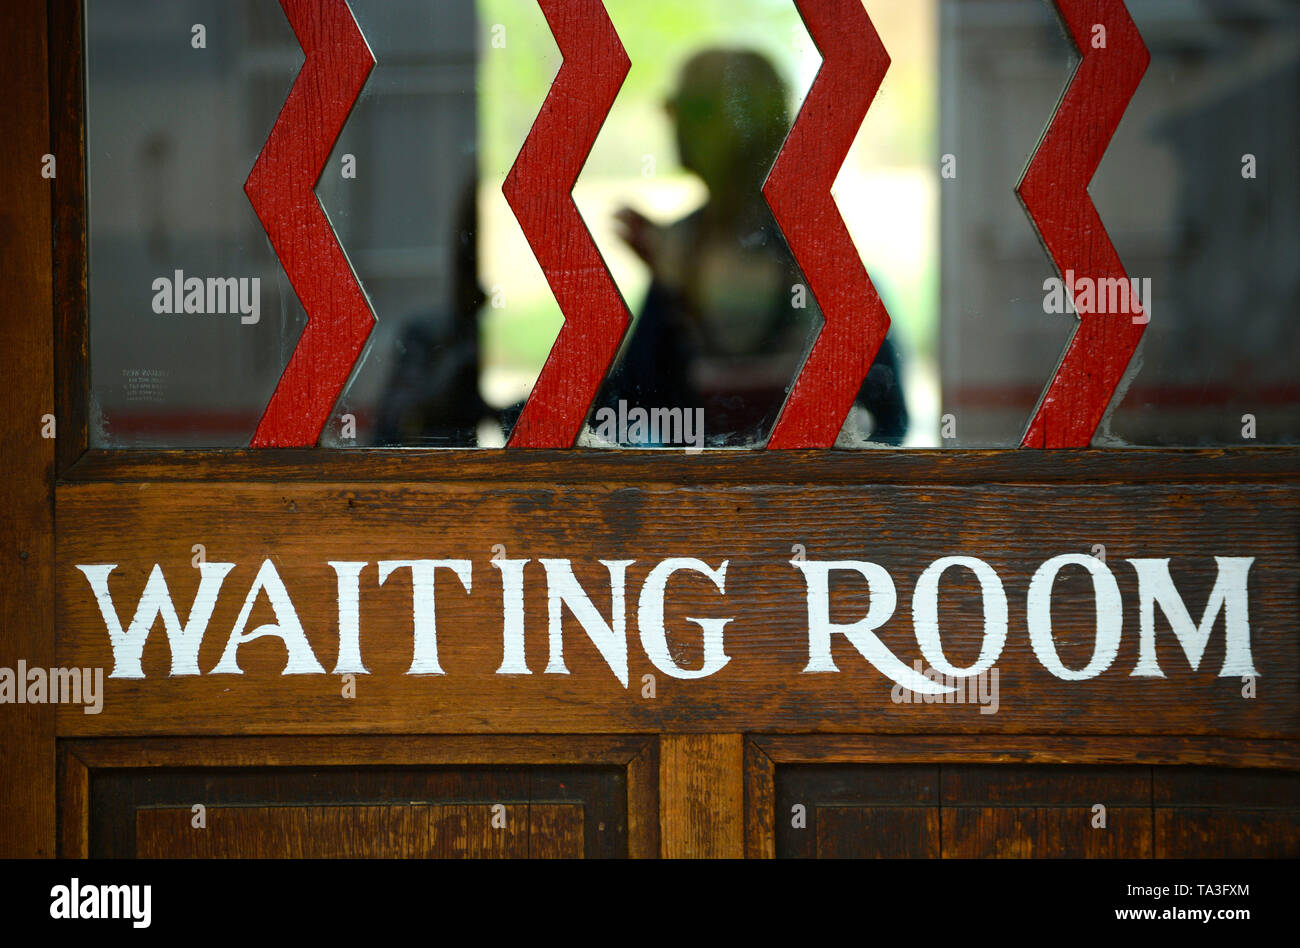 An entrance door to the waiting room at the historic railroad depot in Lamy, New Mexico USA Stock Photo